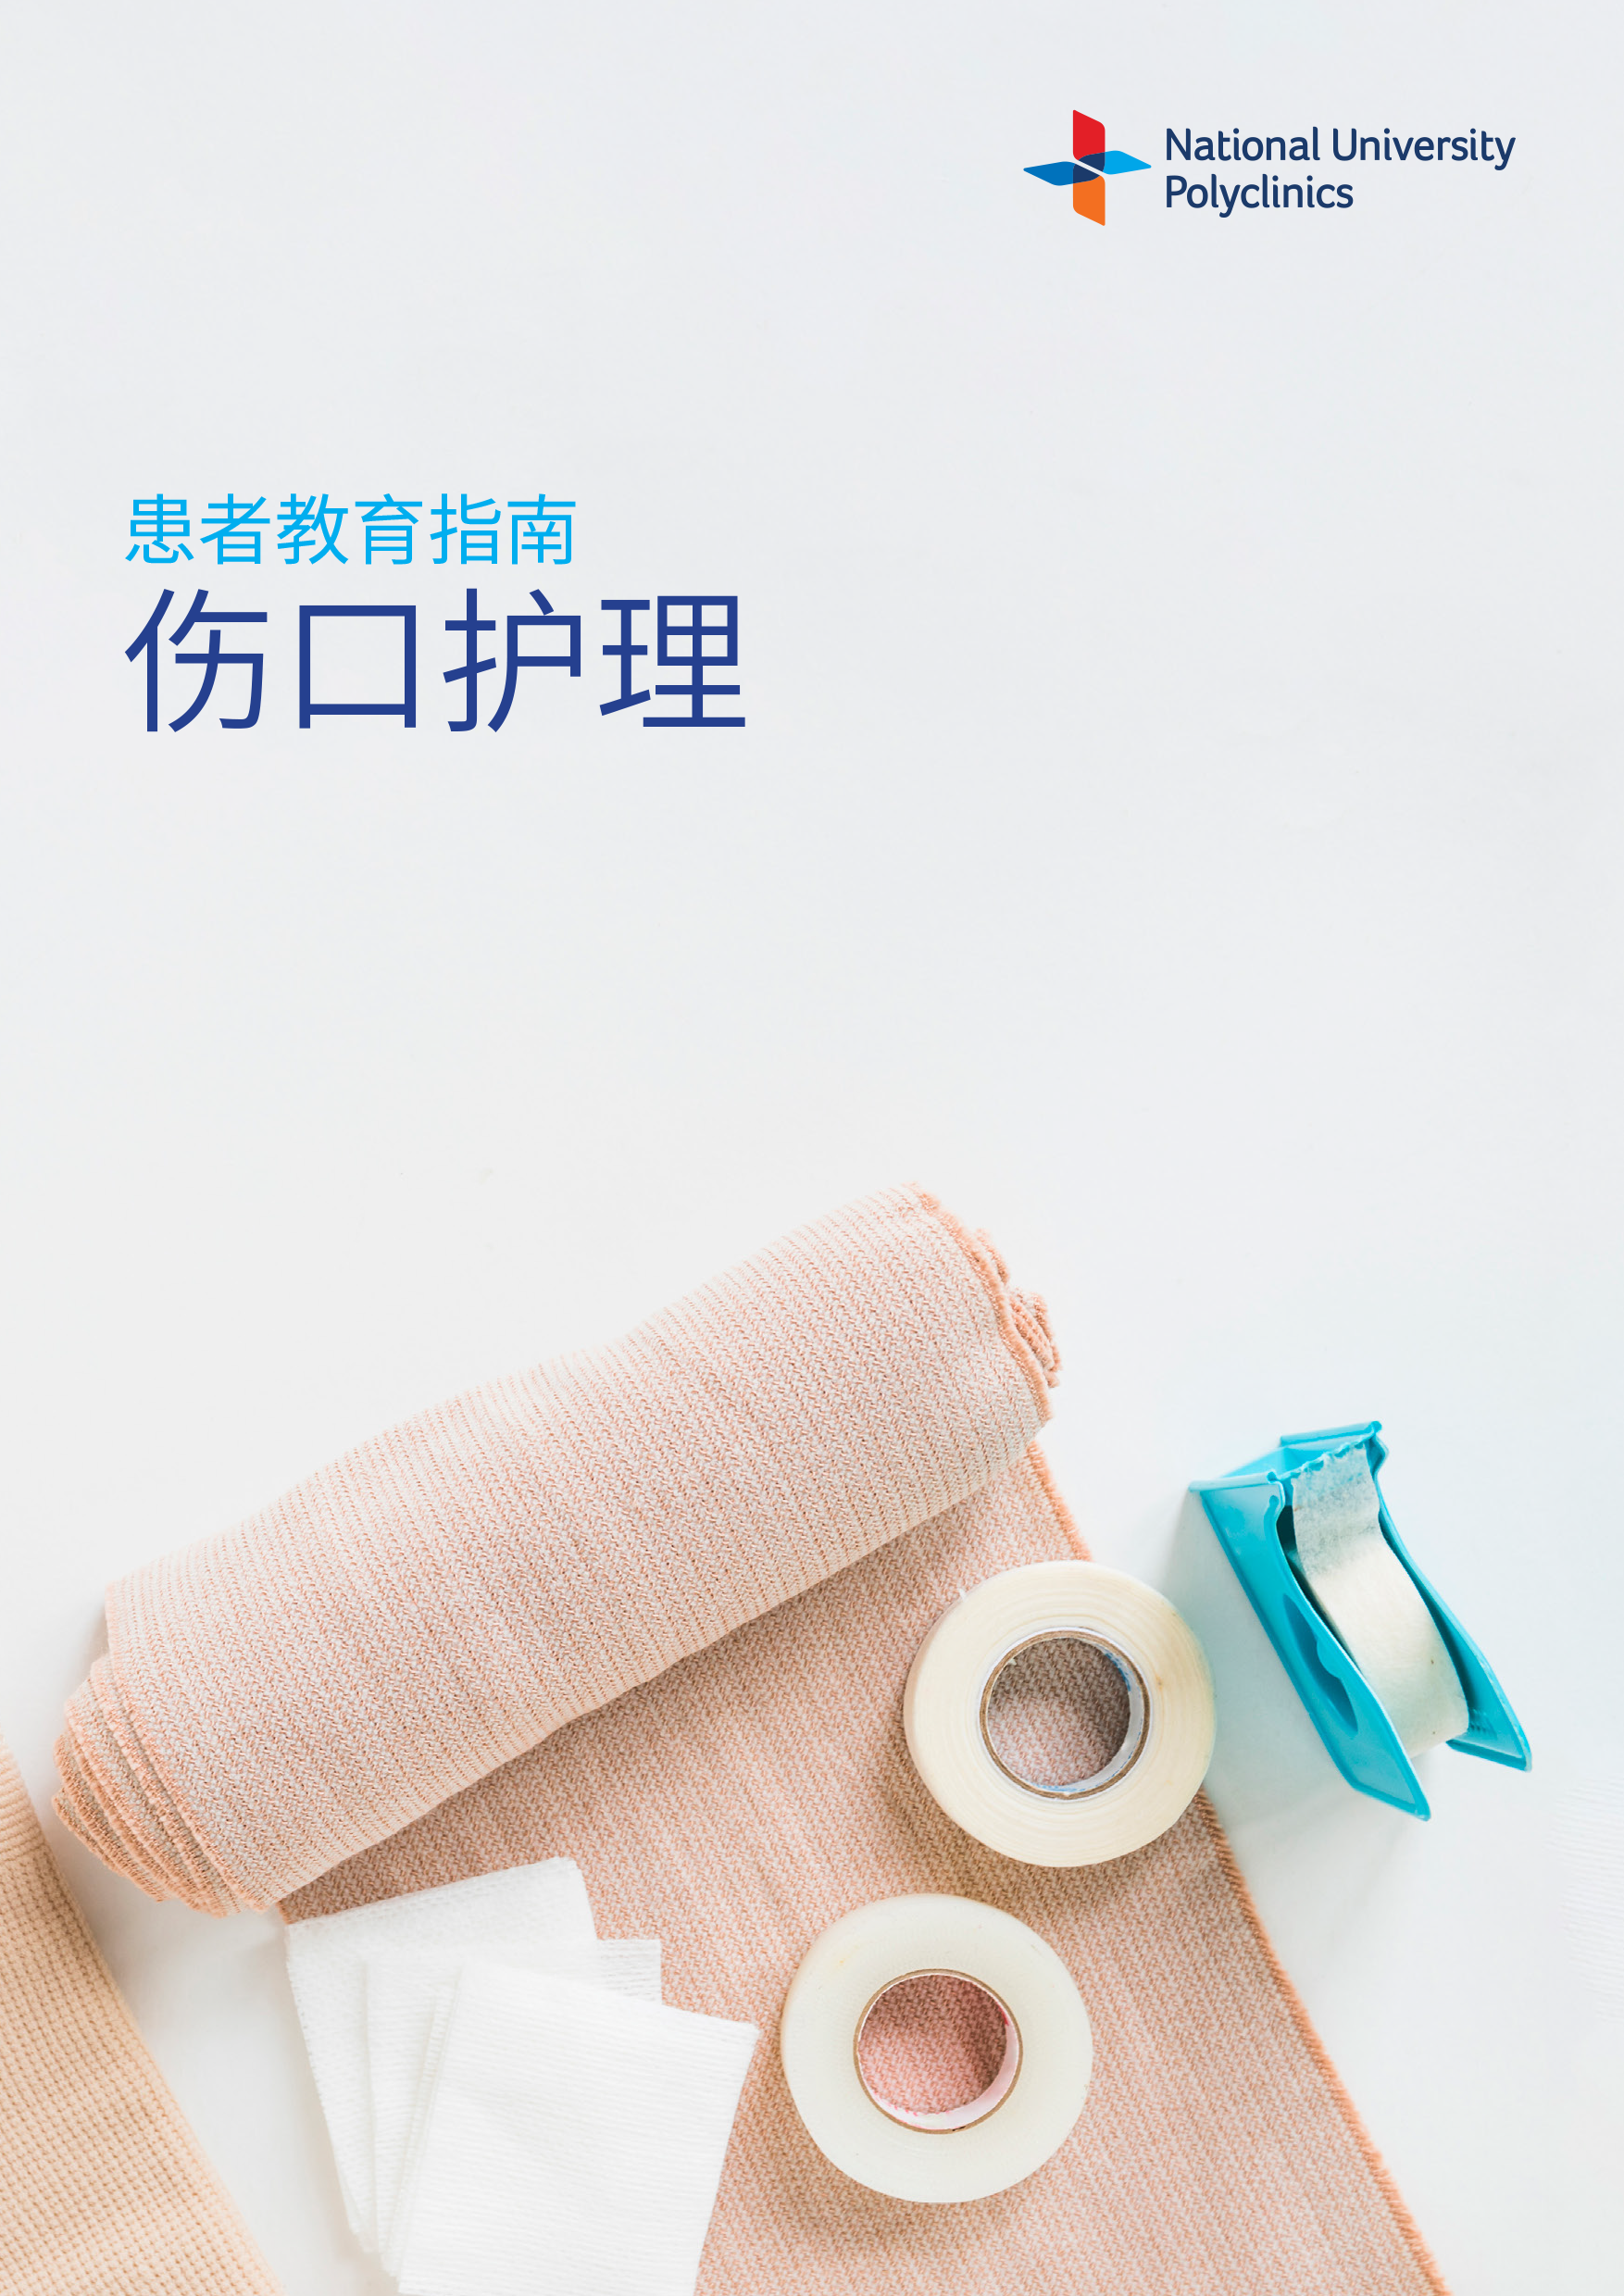 Wound Care (Chinese)